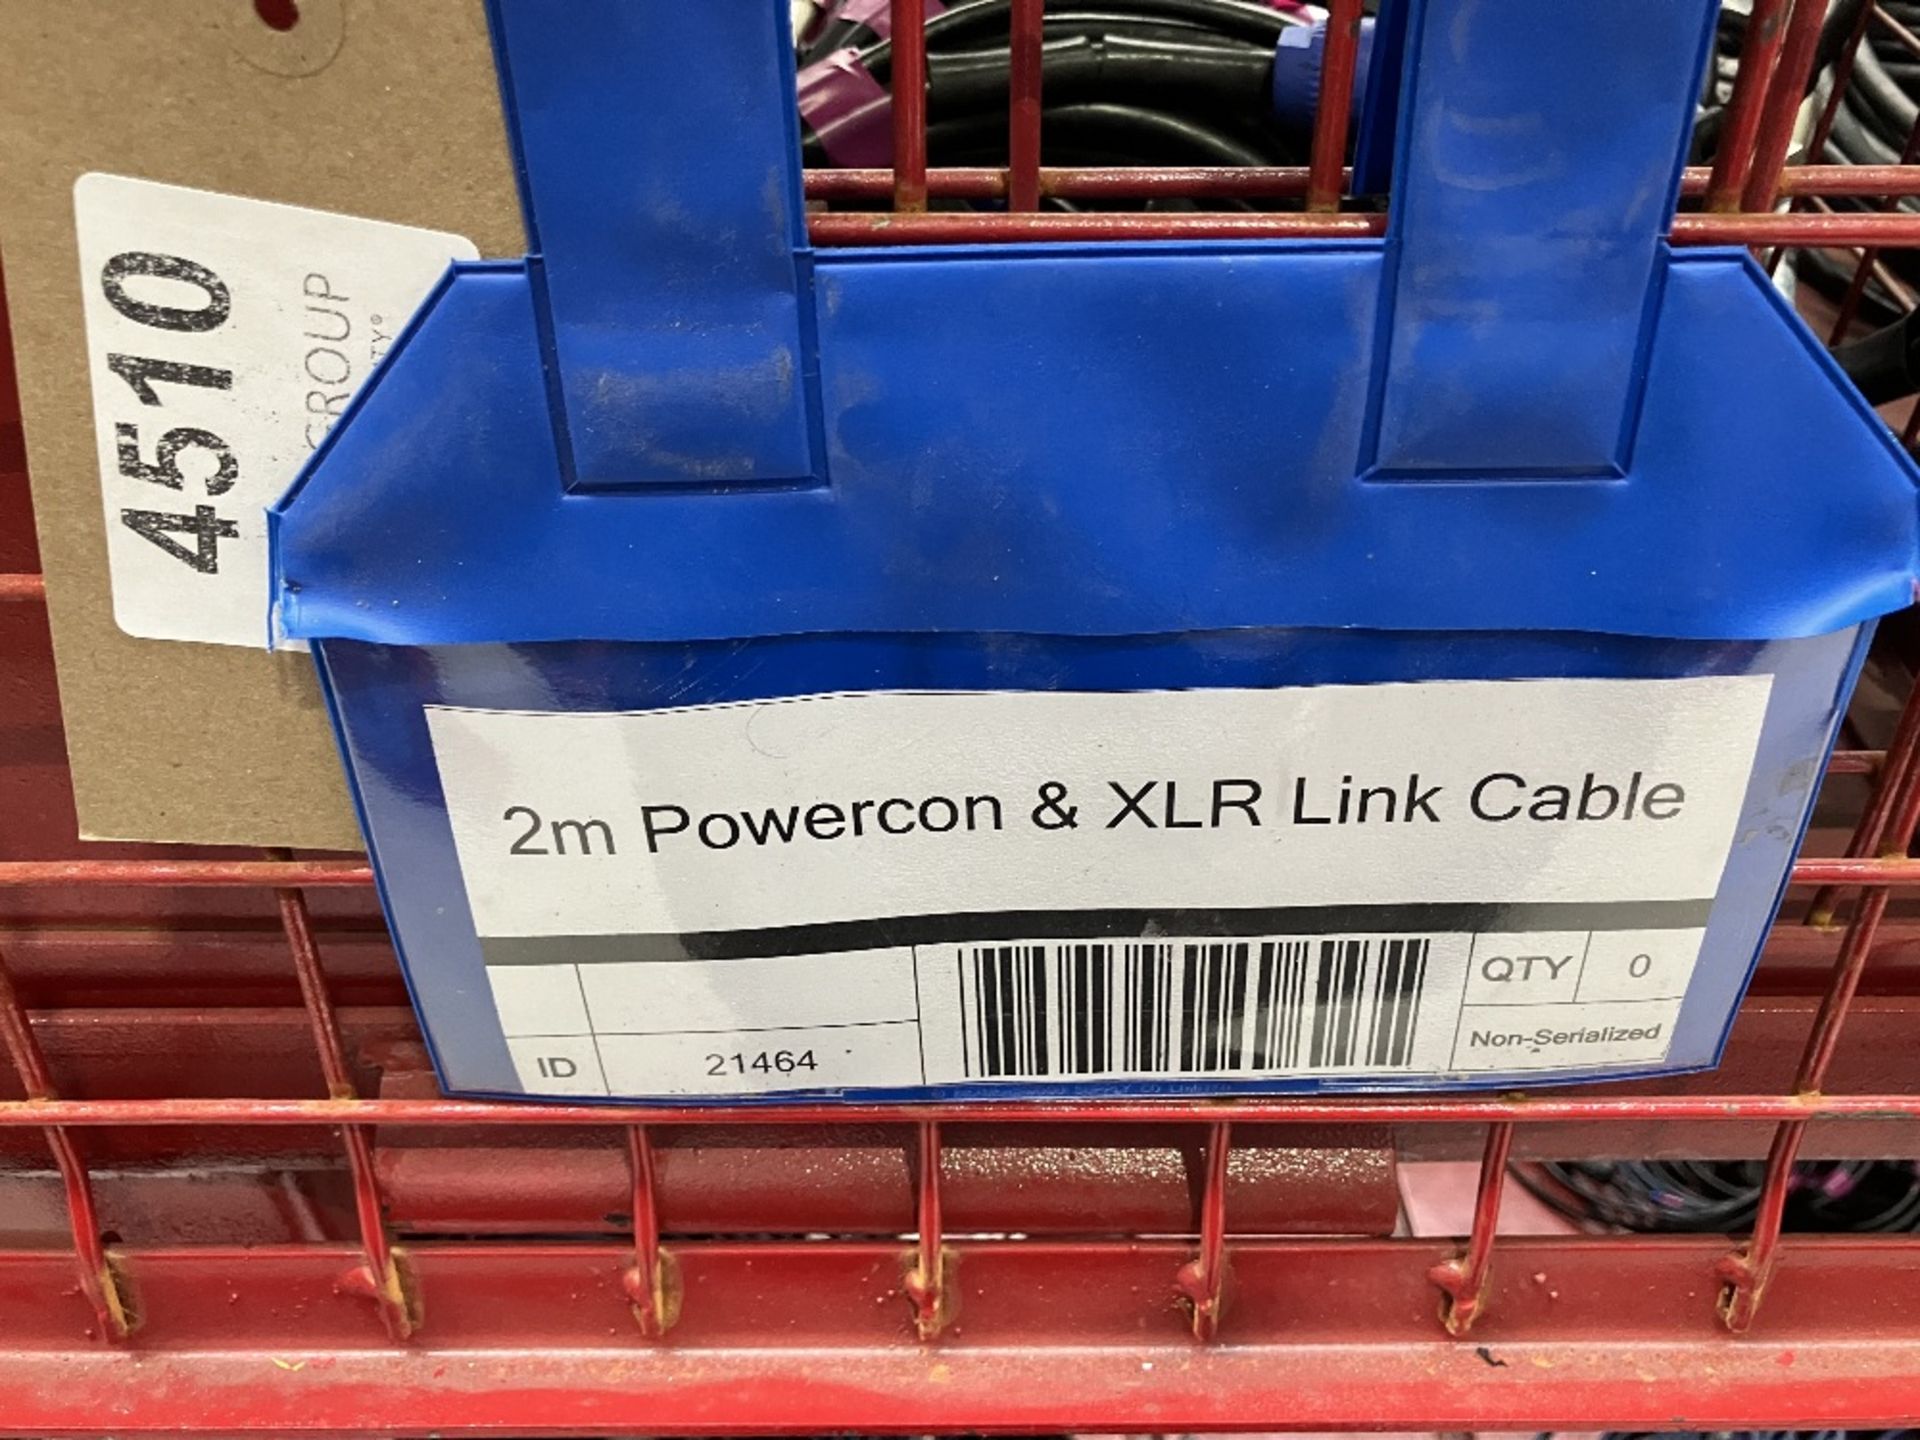 Large Quantity of 2m Powercon & XLR Link Cable with Large Quantity 5m Powercon & XLR Link Cable - Image 3 of 7